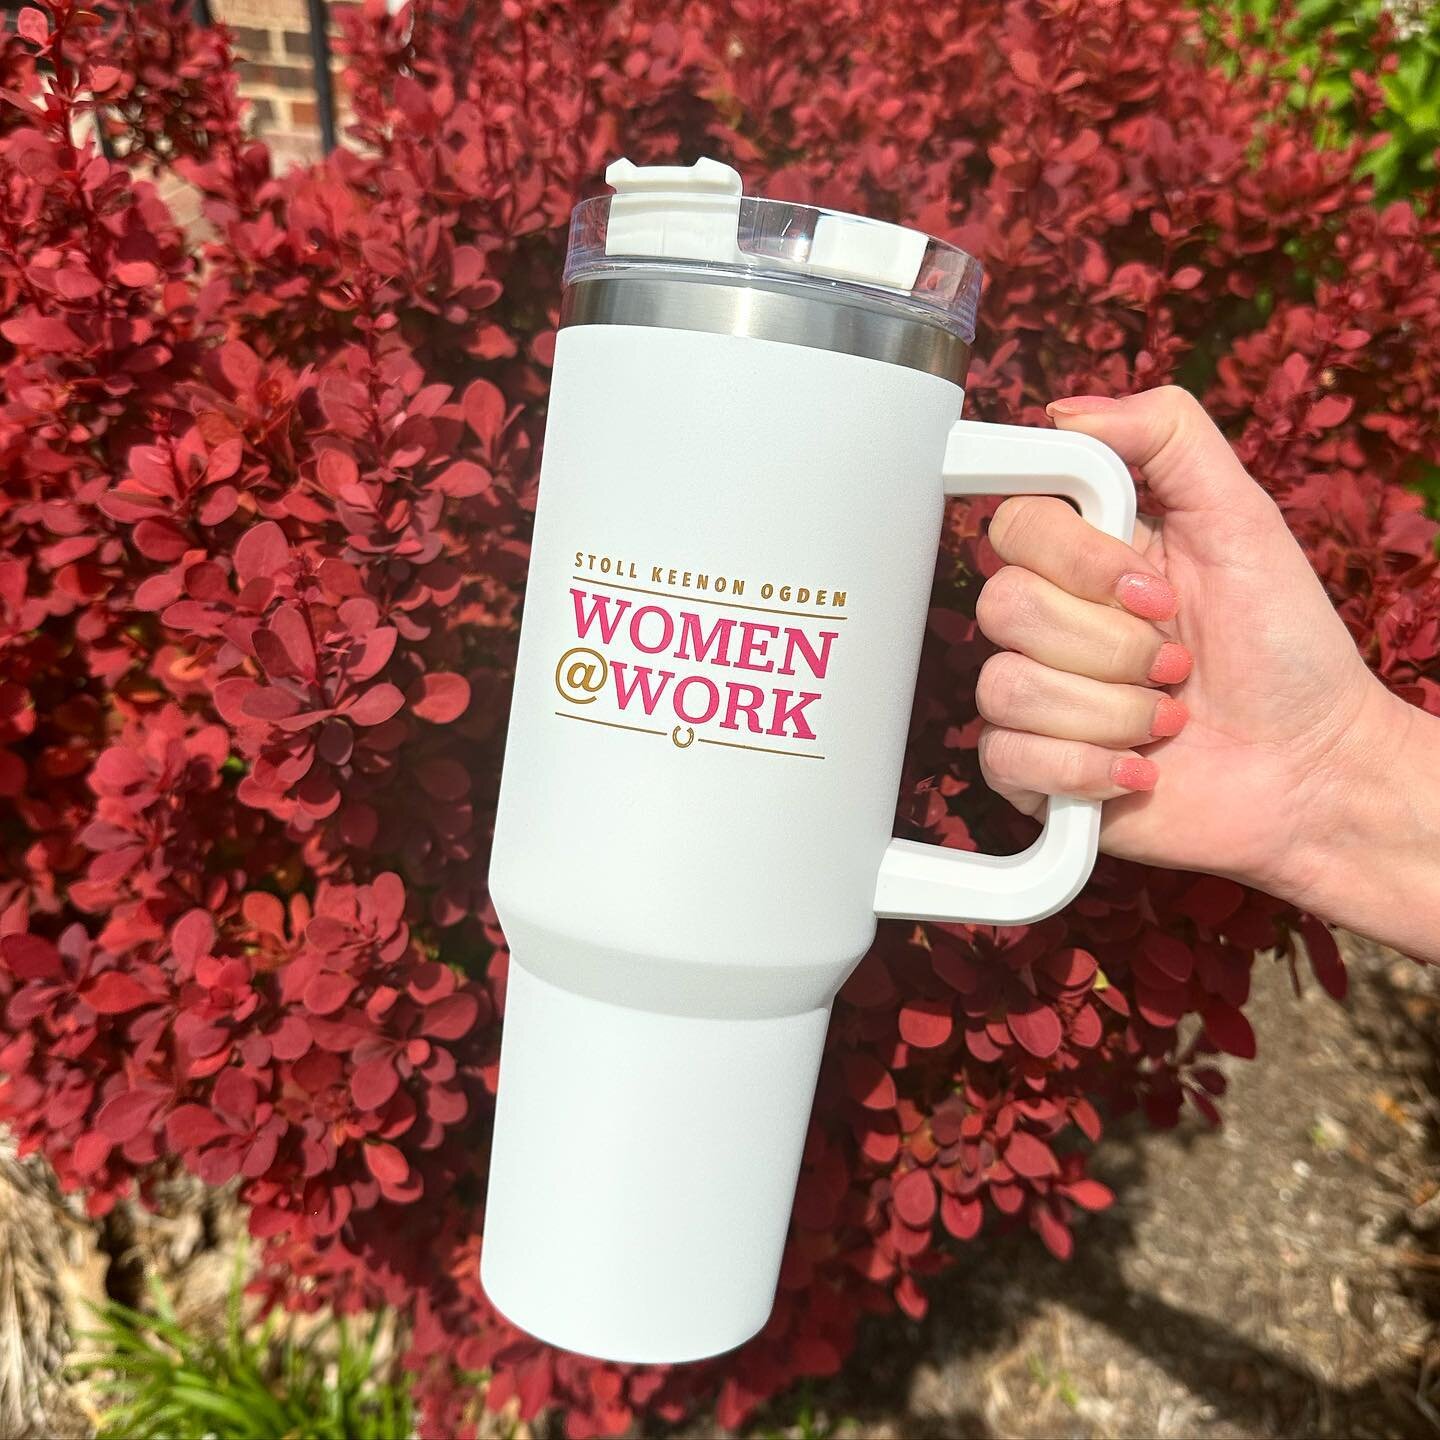 We have found the perfect insulated mug! Does it remind you of a popular brand? 😉
&bull;
&bull;
&bull;
&bull;
#lexingtonky #lexington #kentucky #promotionalproducts #promo #promotionalgifts #merch #custommerch #logo #womenatwork #workingwomen #stanl